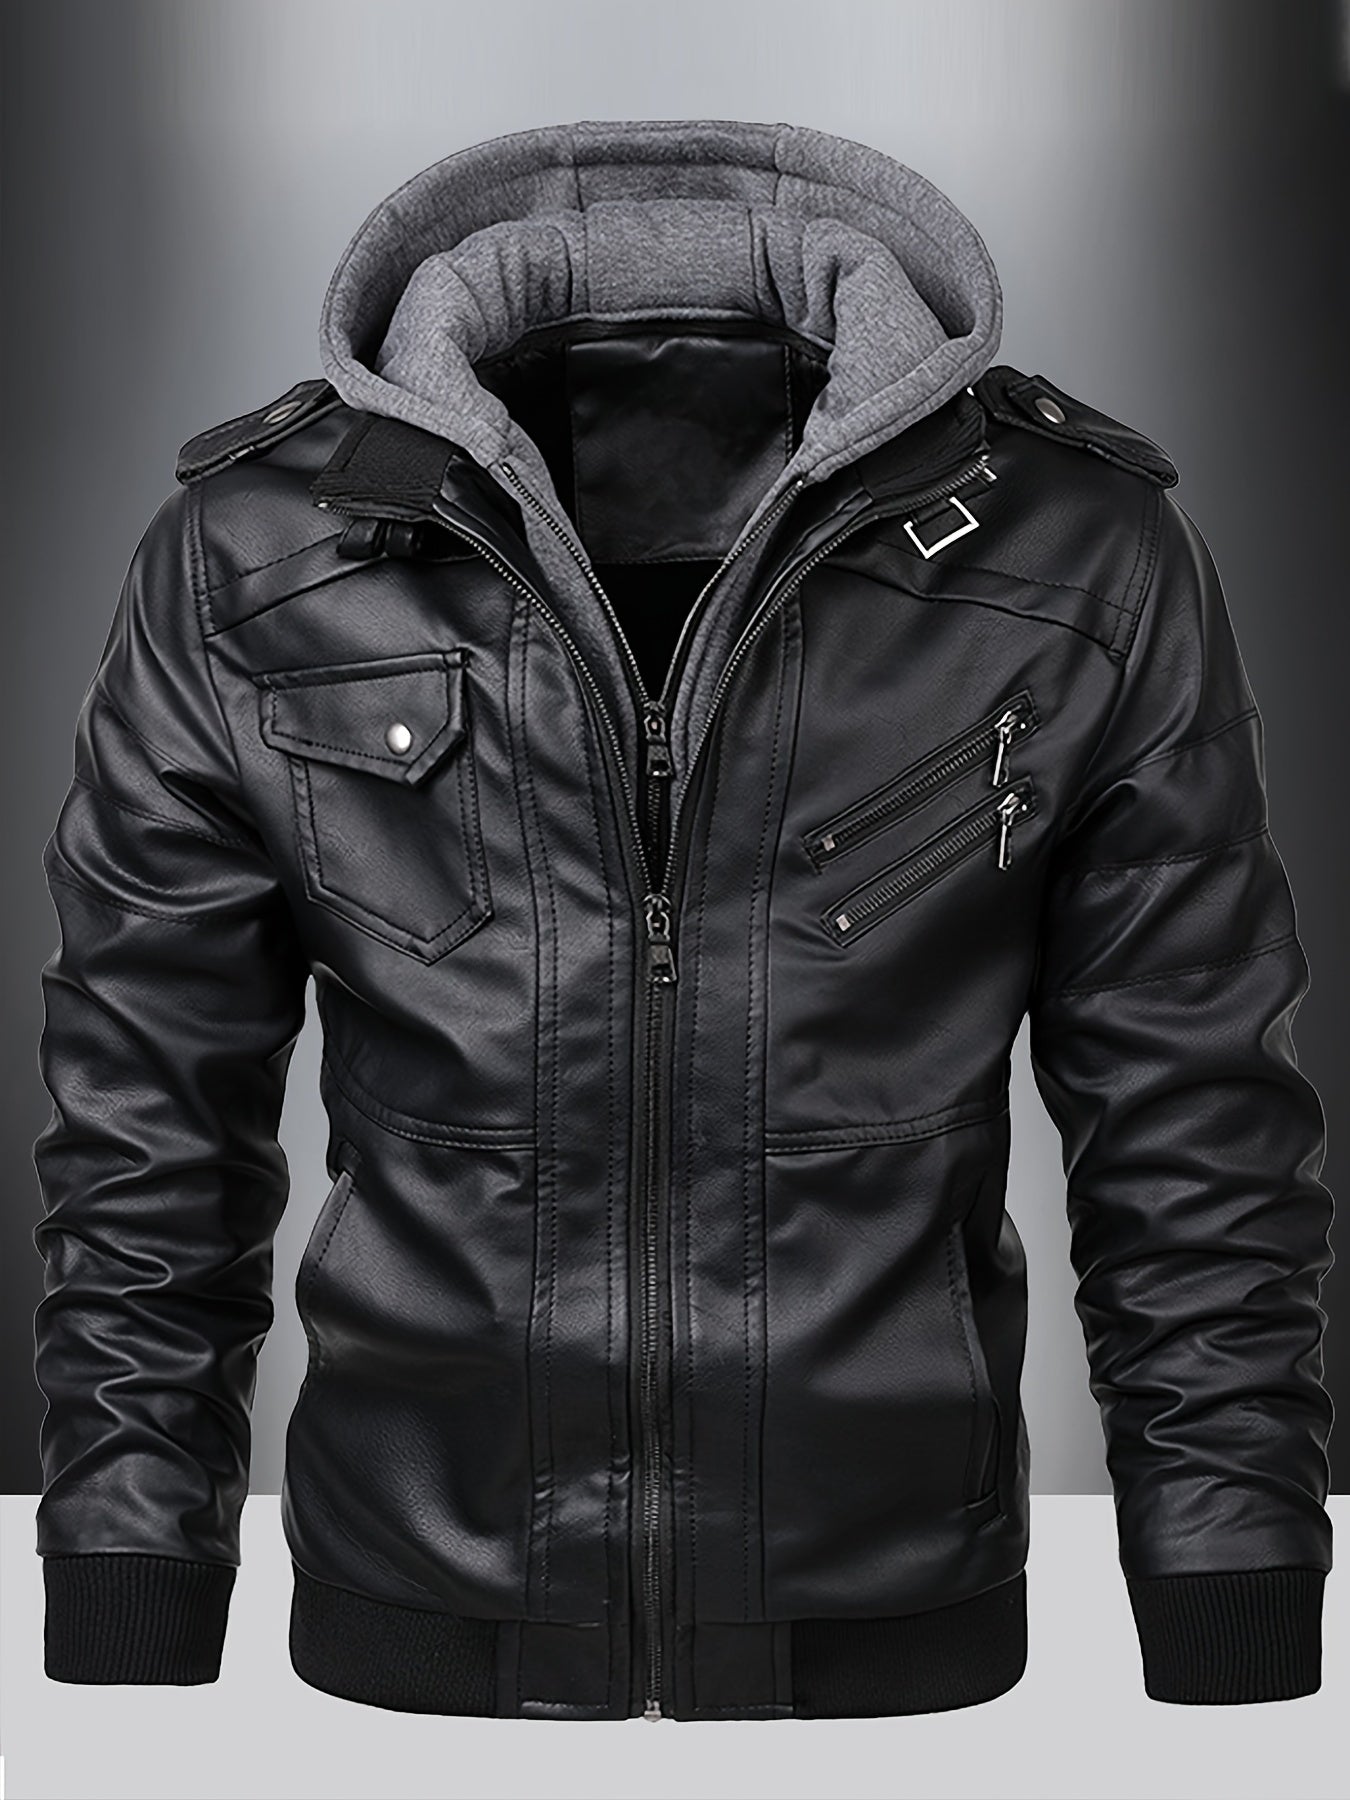 Ride with Confidence: Maplesteed Motorcycle Leather Jackets - CasualFlowshop